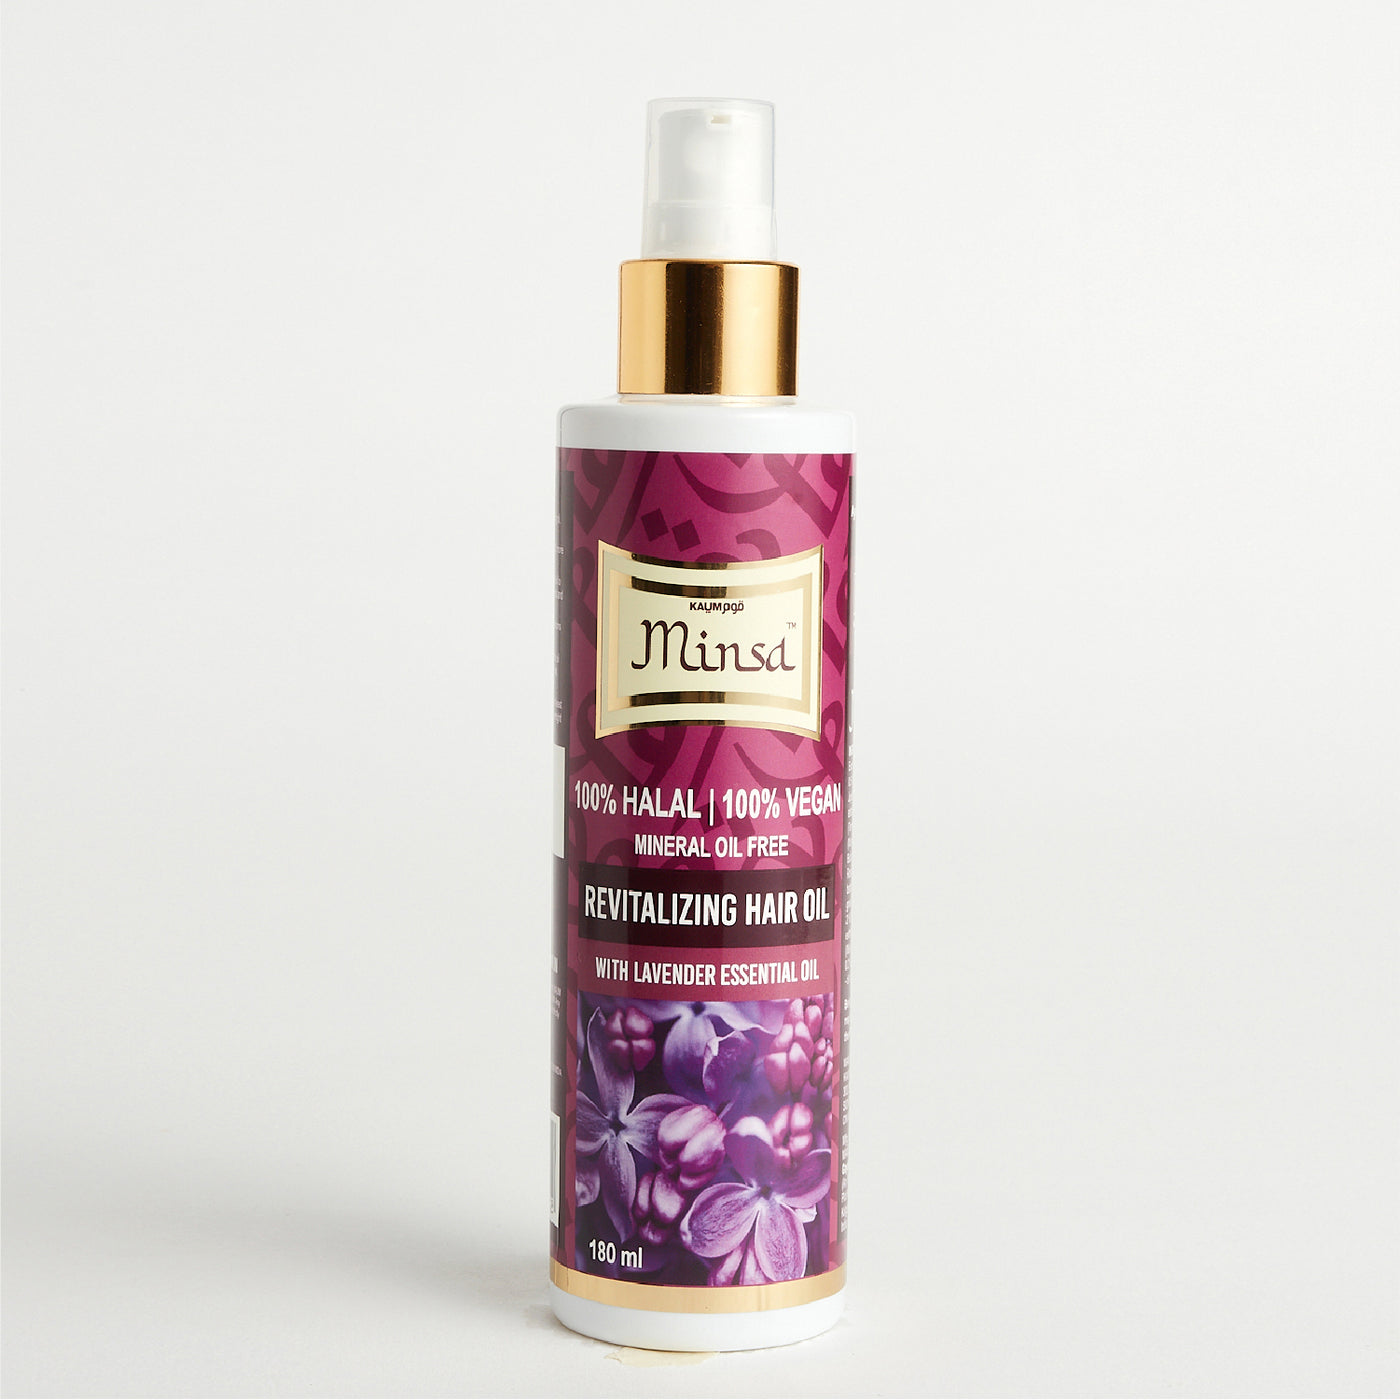 Minsa Revitalizing Hair Oil with Lavender and Essential Oils - 180ml: Nourish Your Hair, Unwind Your Senses